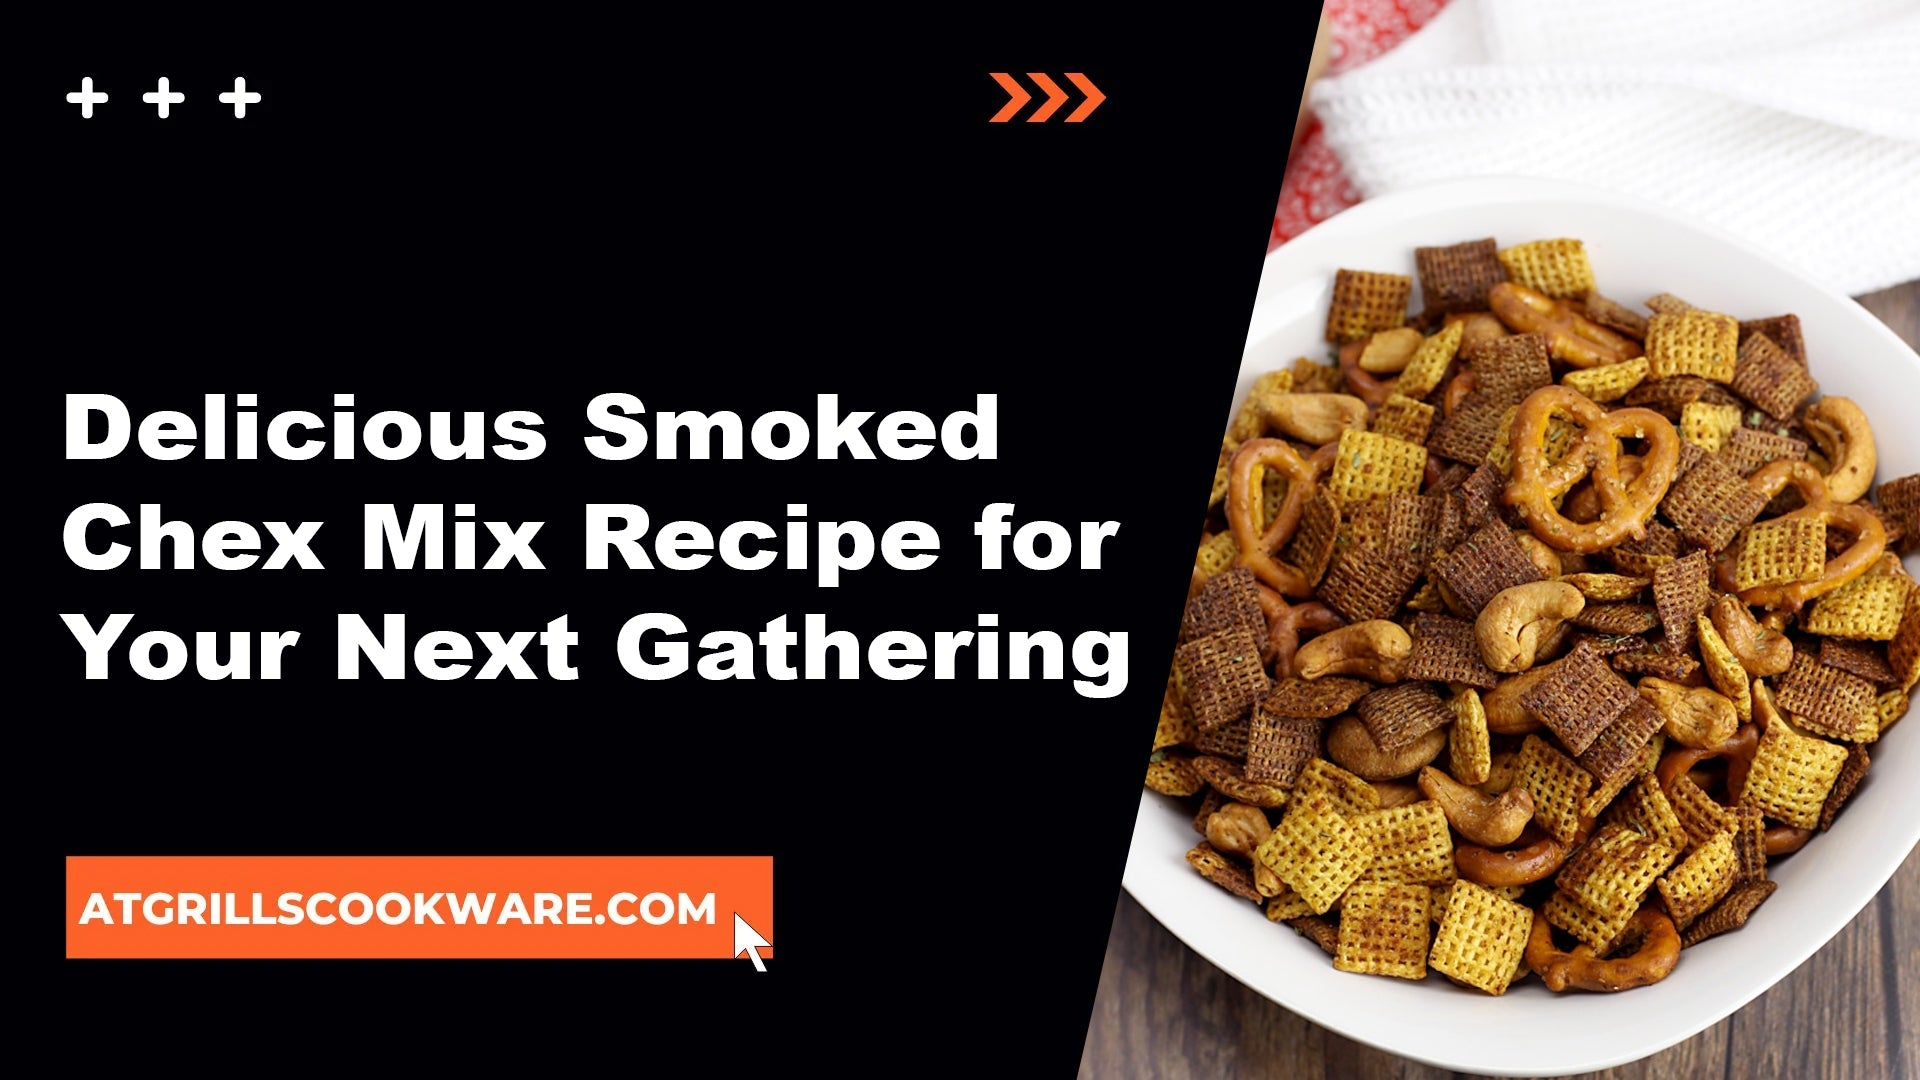 Delicious Smoked Chex Mix Recipe for Your Next Gathering